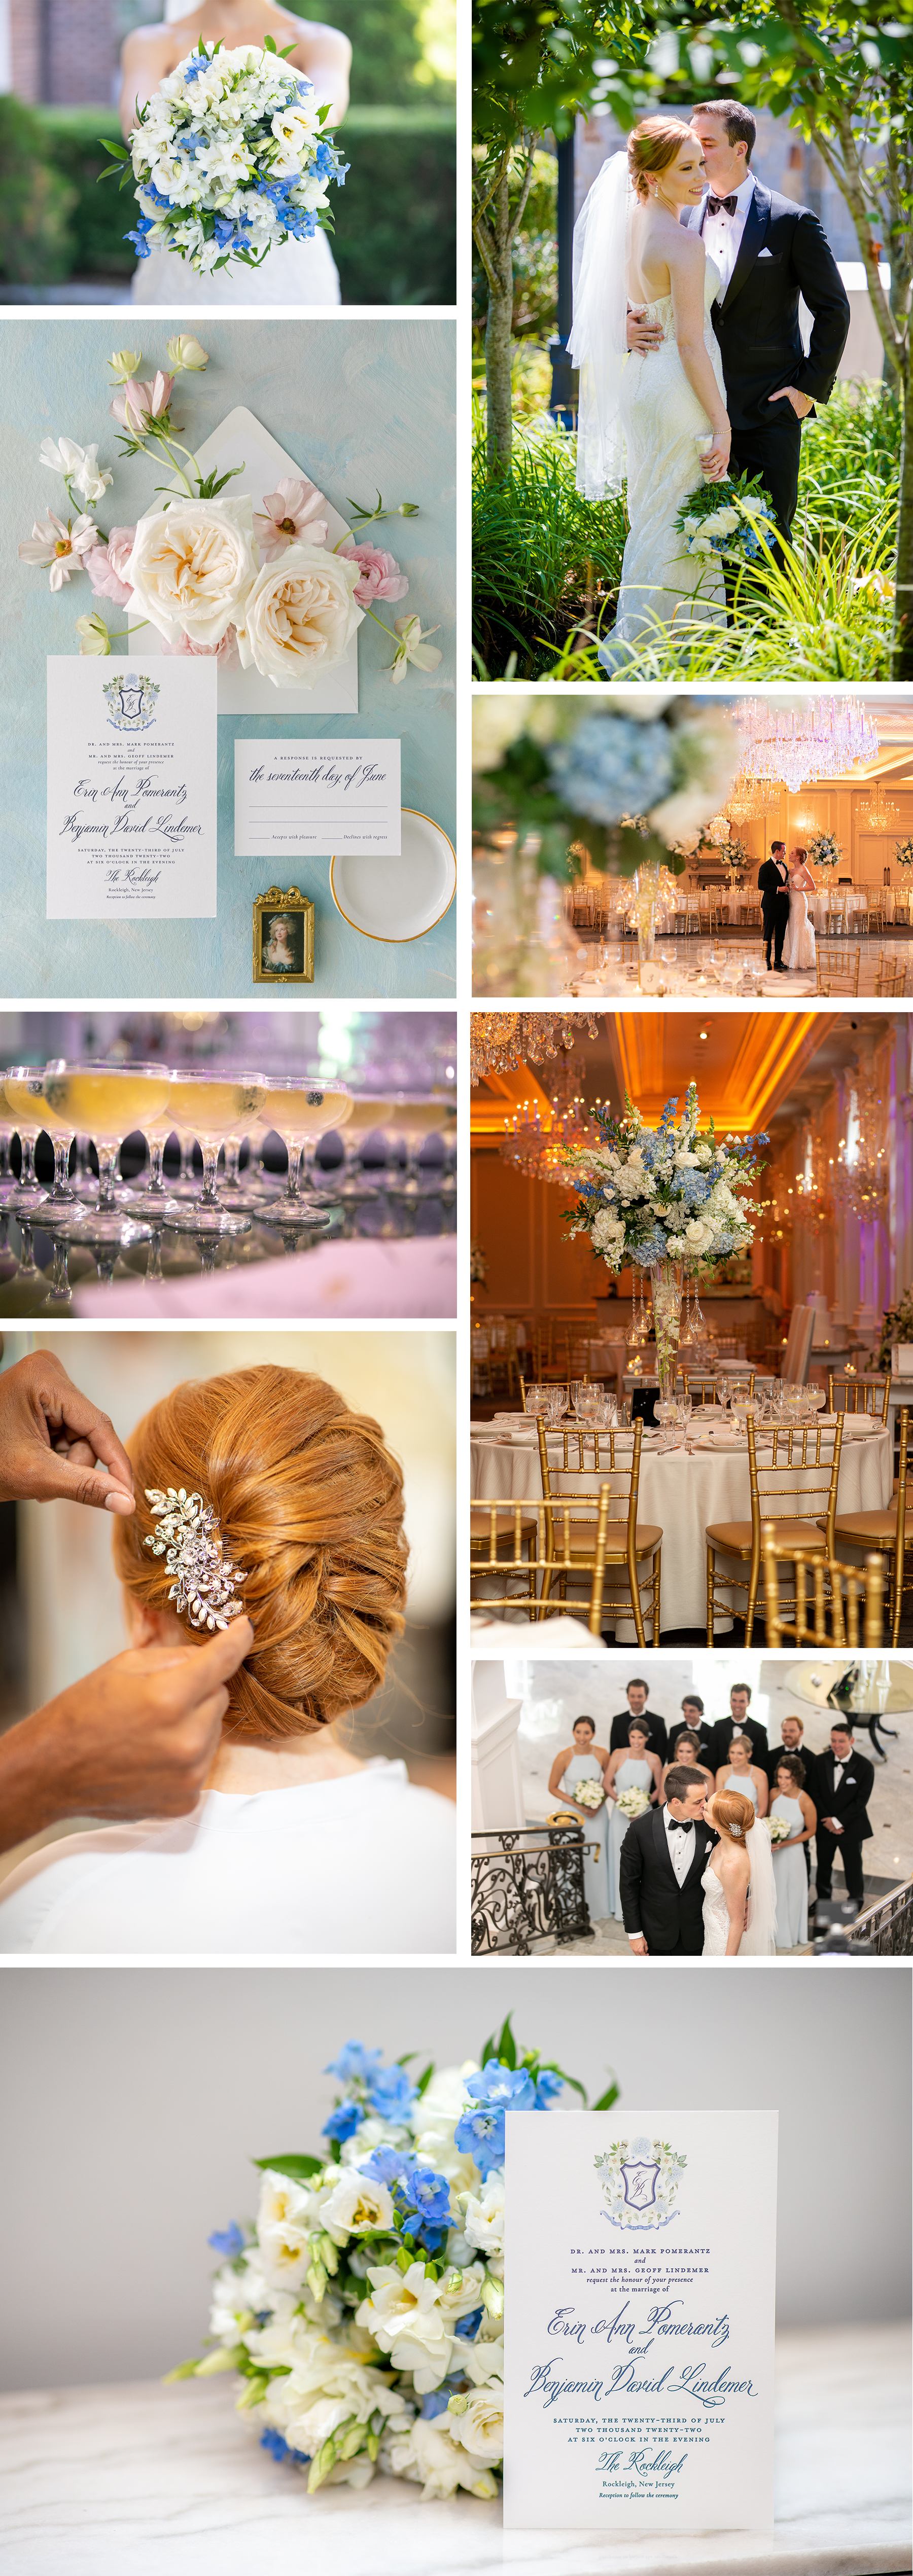 Wedding at The Rockleigh with custom stationery by Turnage and Watts